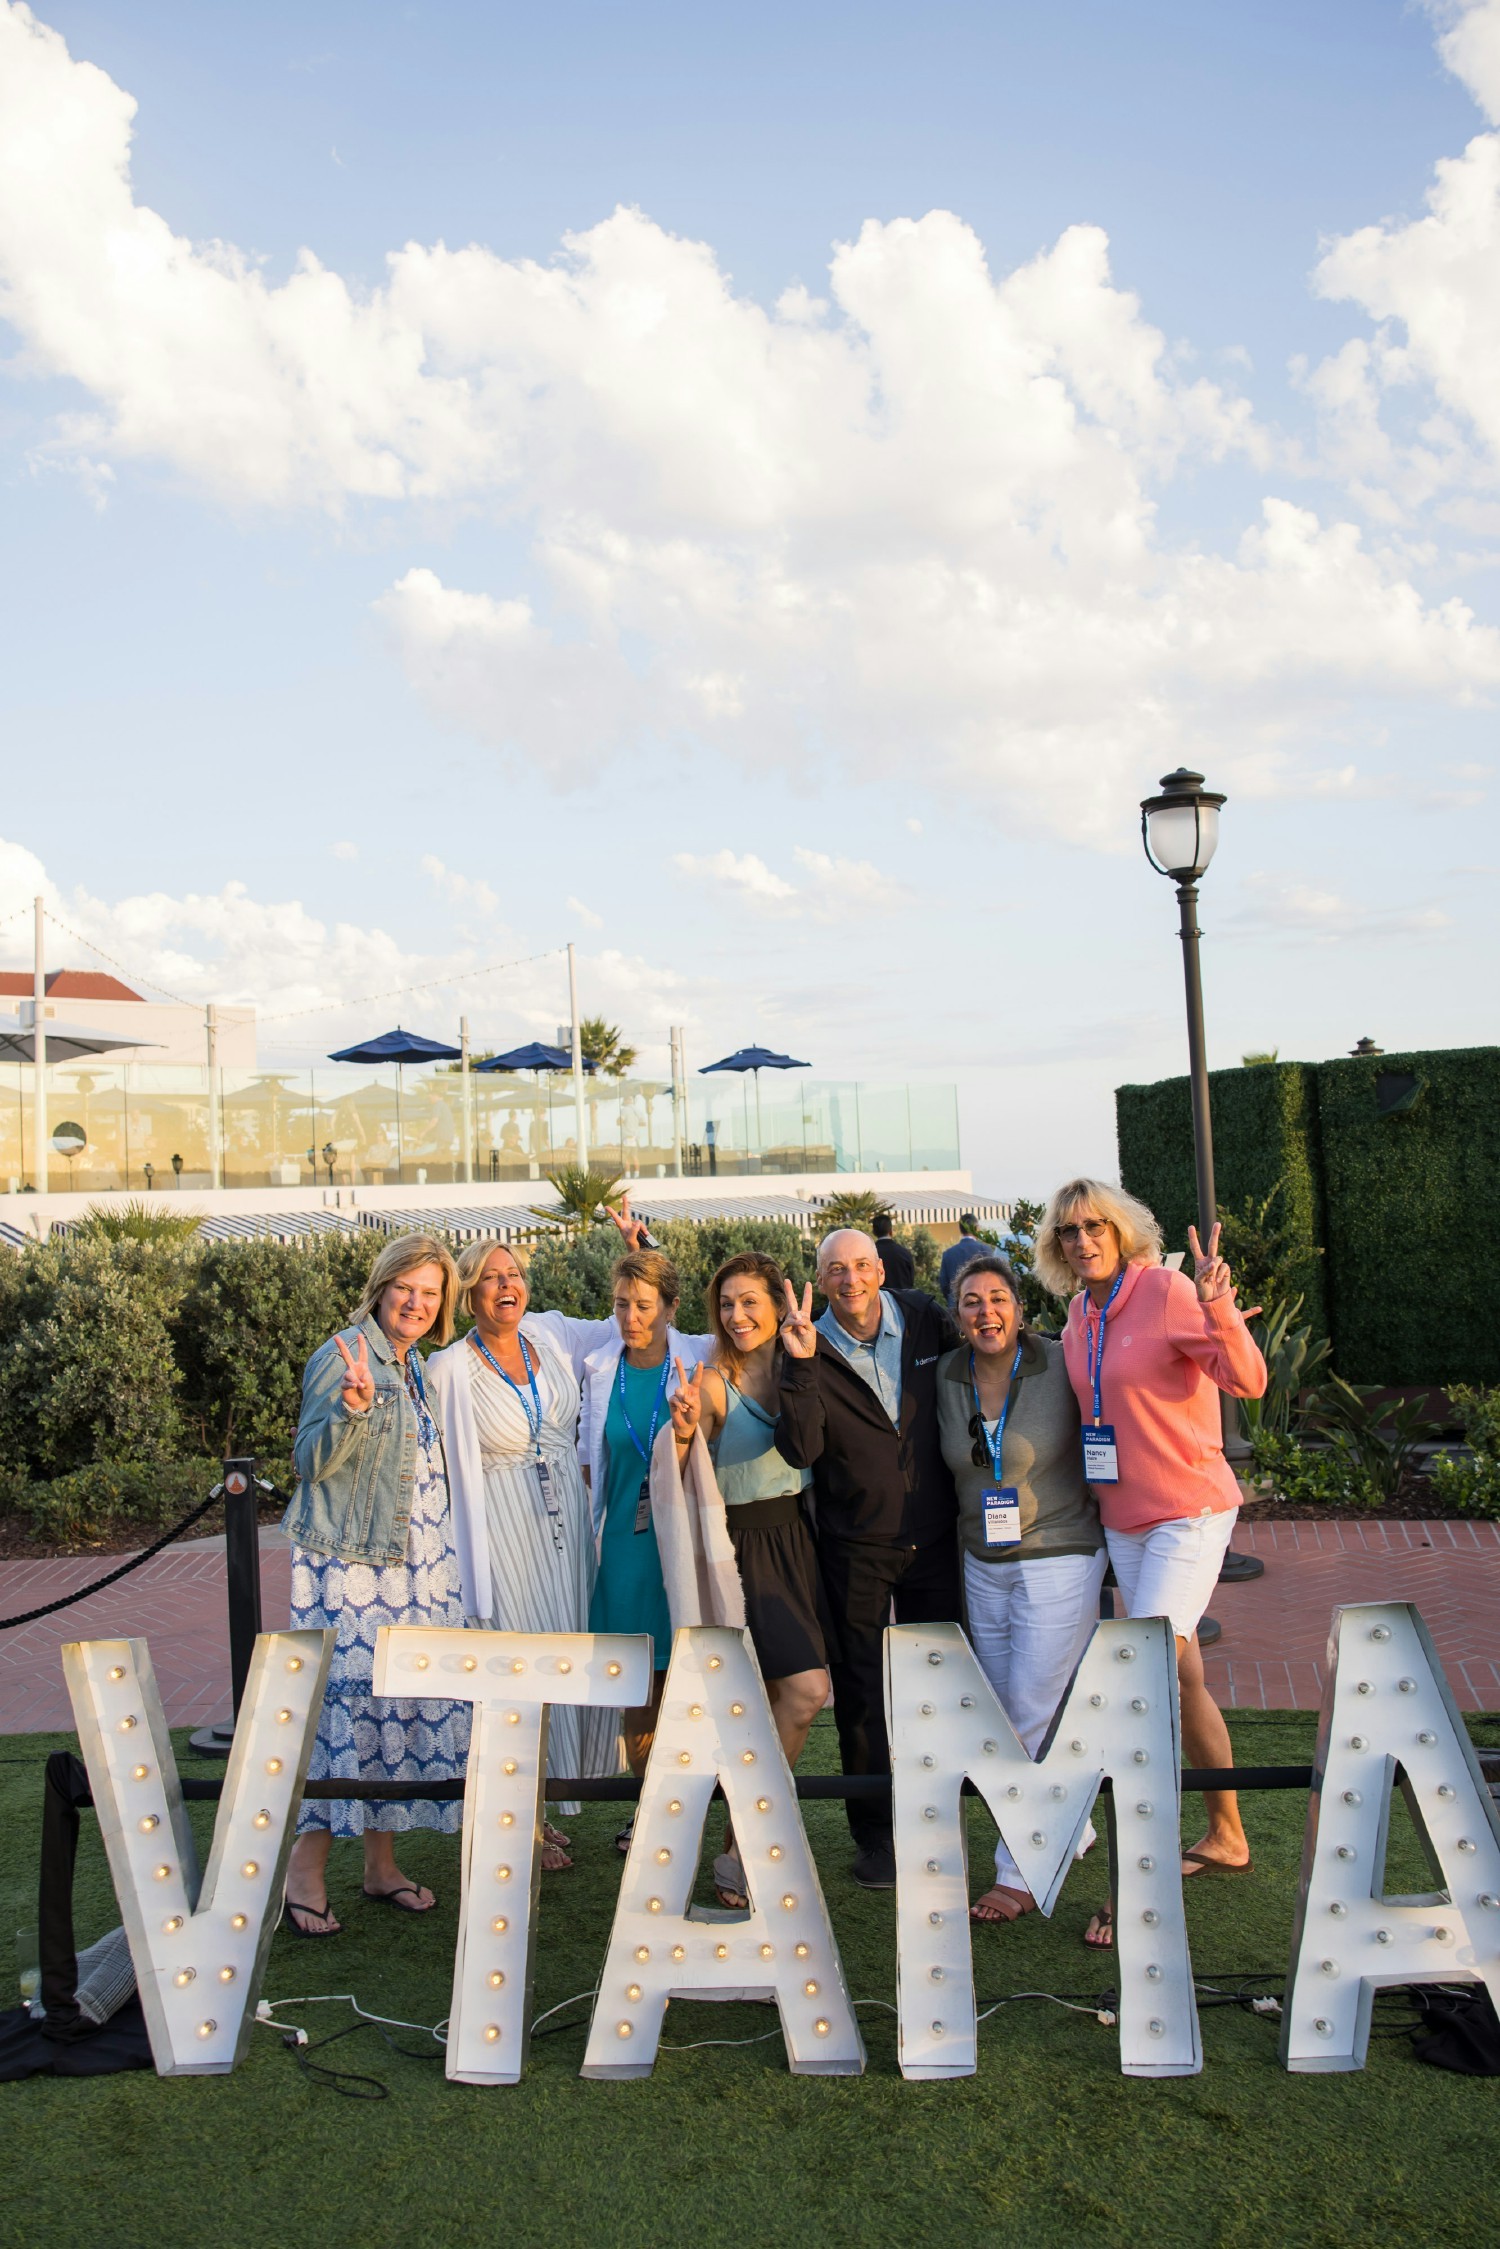 Great fun at the launch of our first product, VTAMA